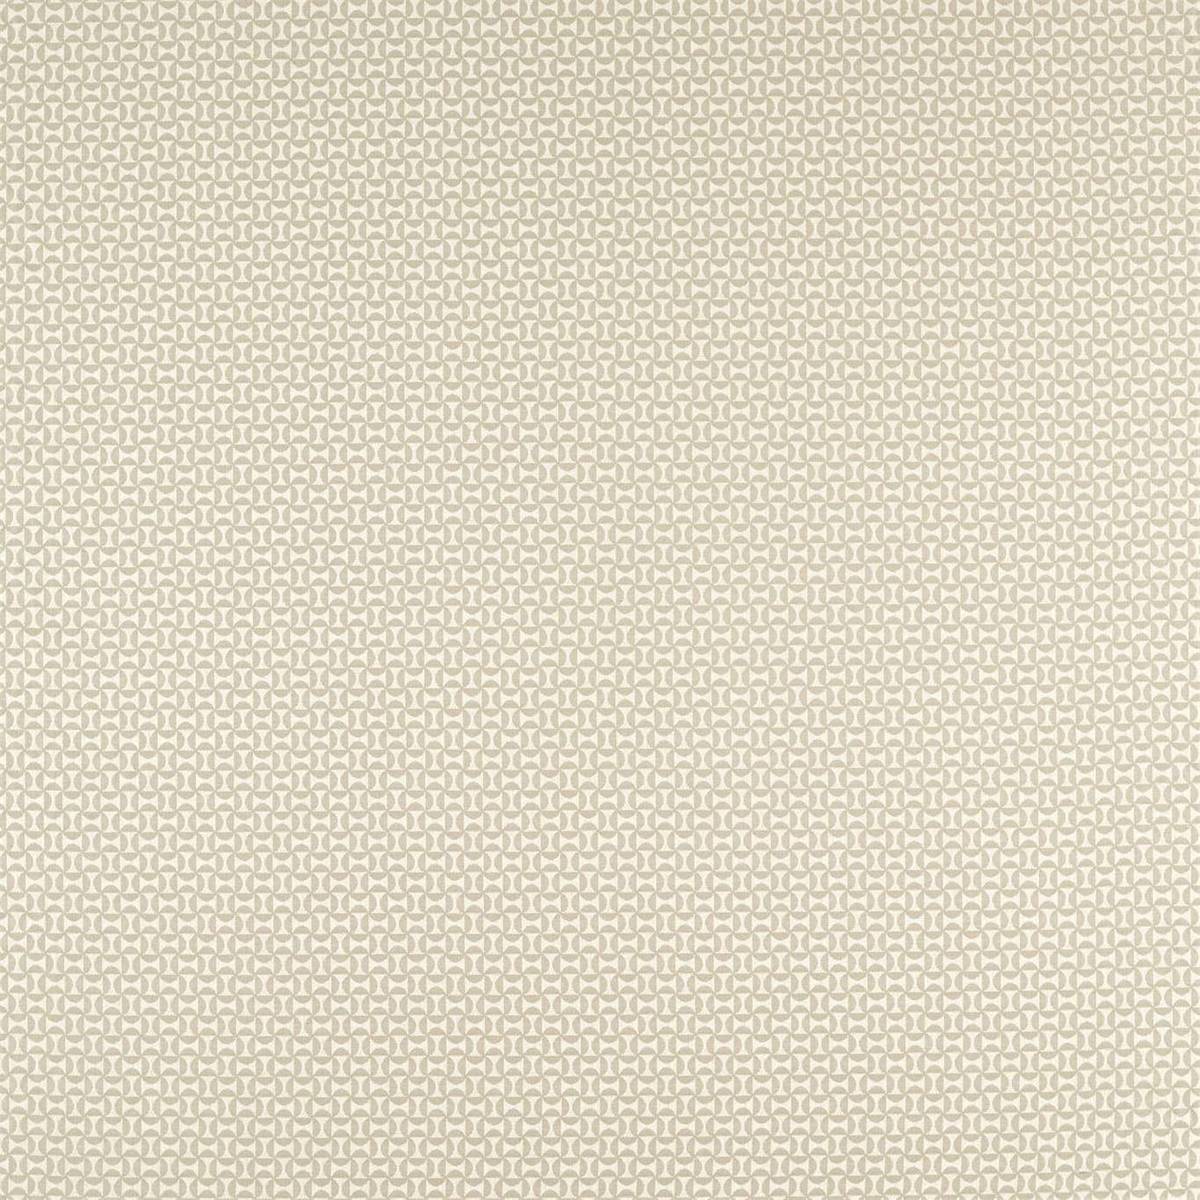 Forma Hessian Fabric by Scion